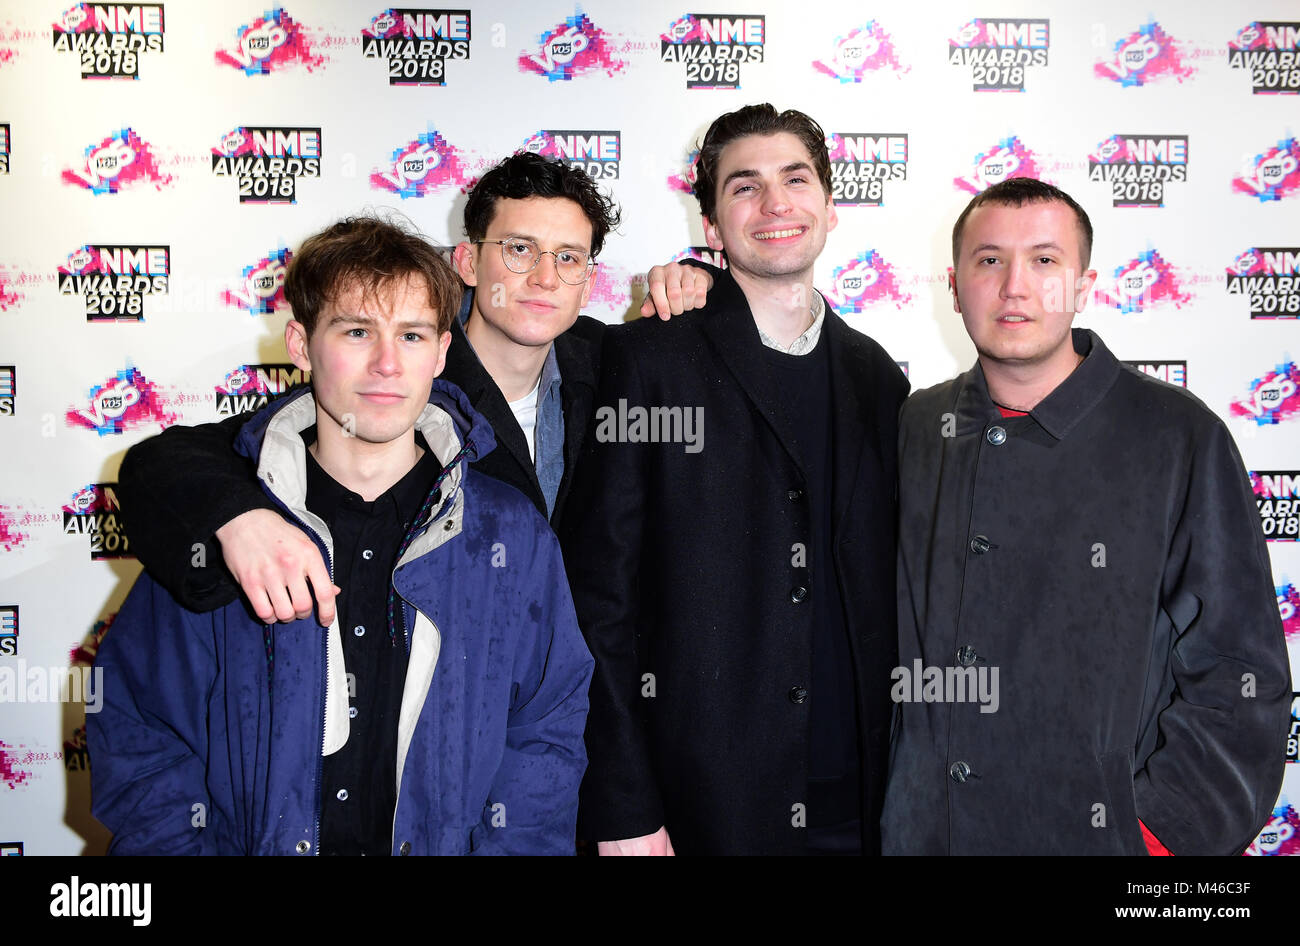 The Magic Gang (Paeris Giles, Kristian Smith, Angus Taylor, Jack Kaye)  arriving for the VO5 NME Awards 2018 held at the O2 Brixton Academy, London  Stock Photo - Alamy